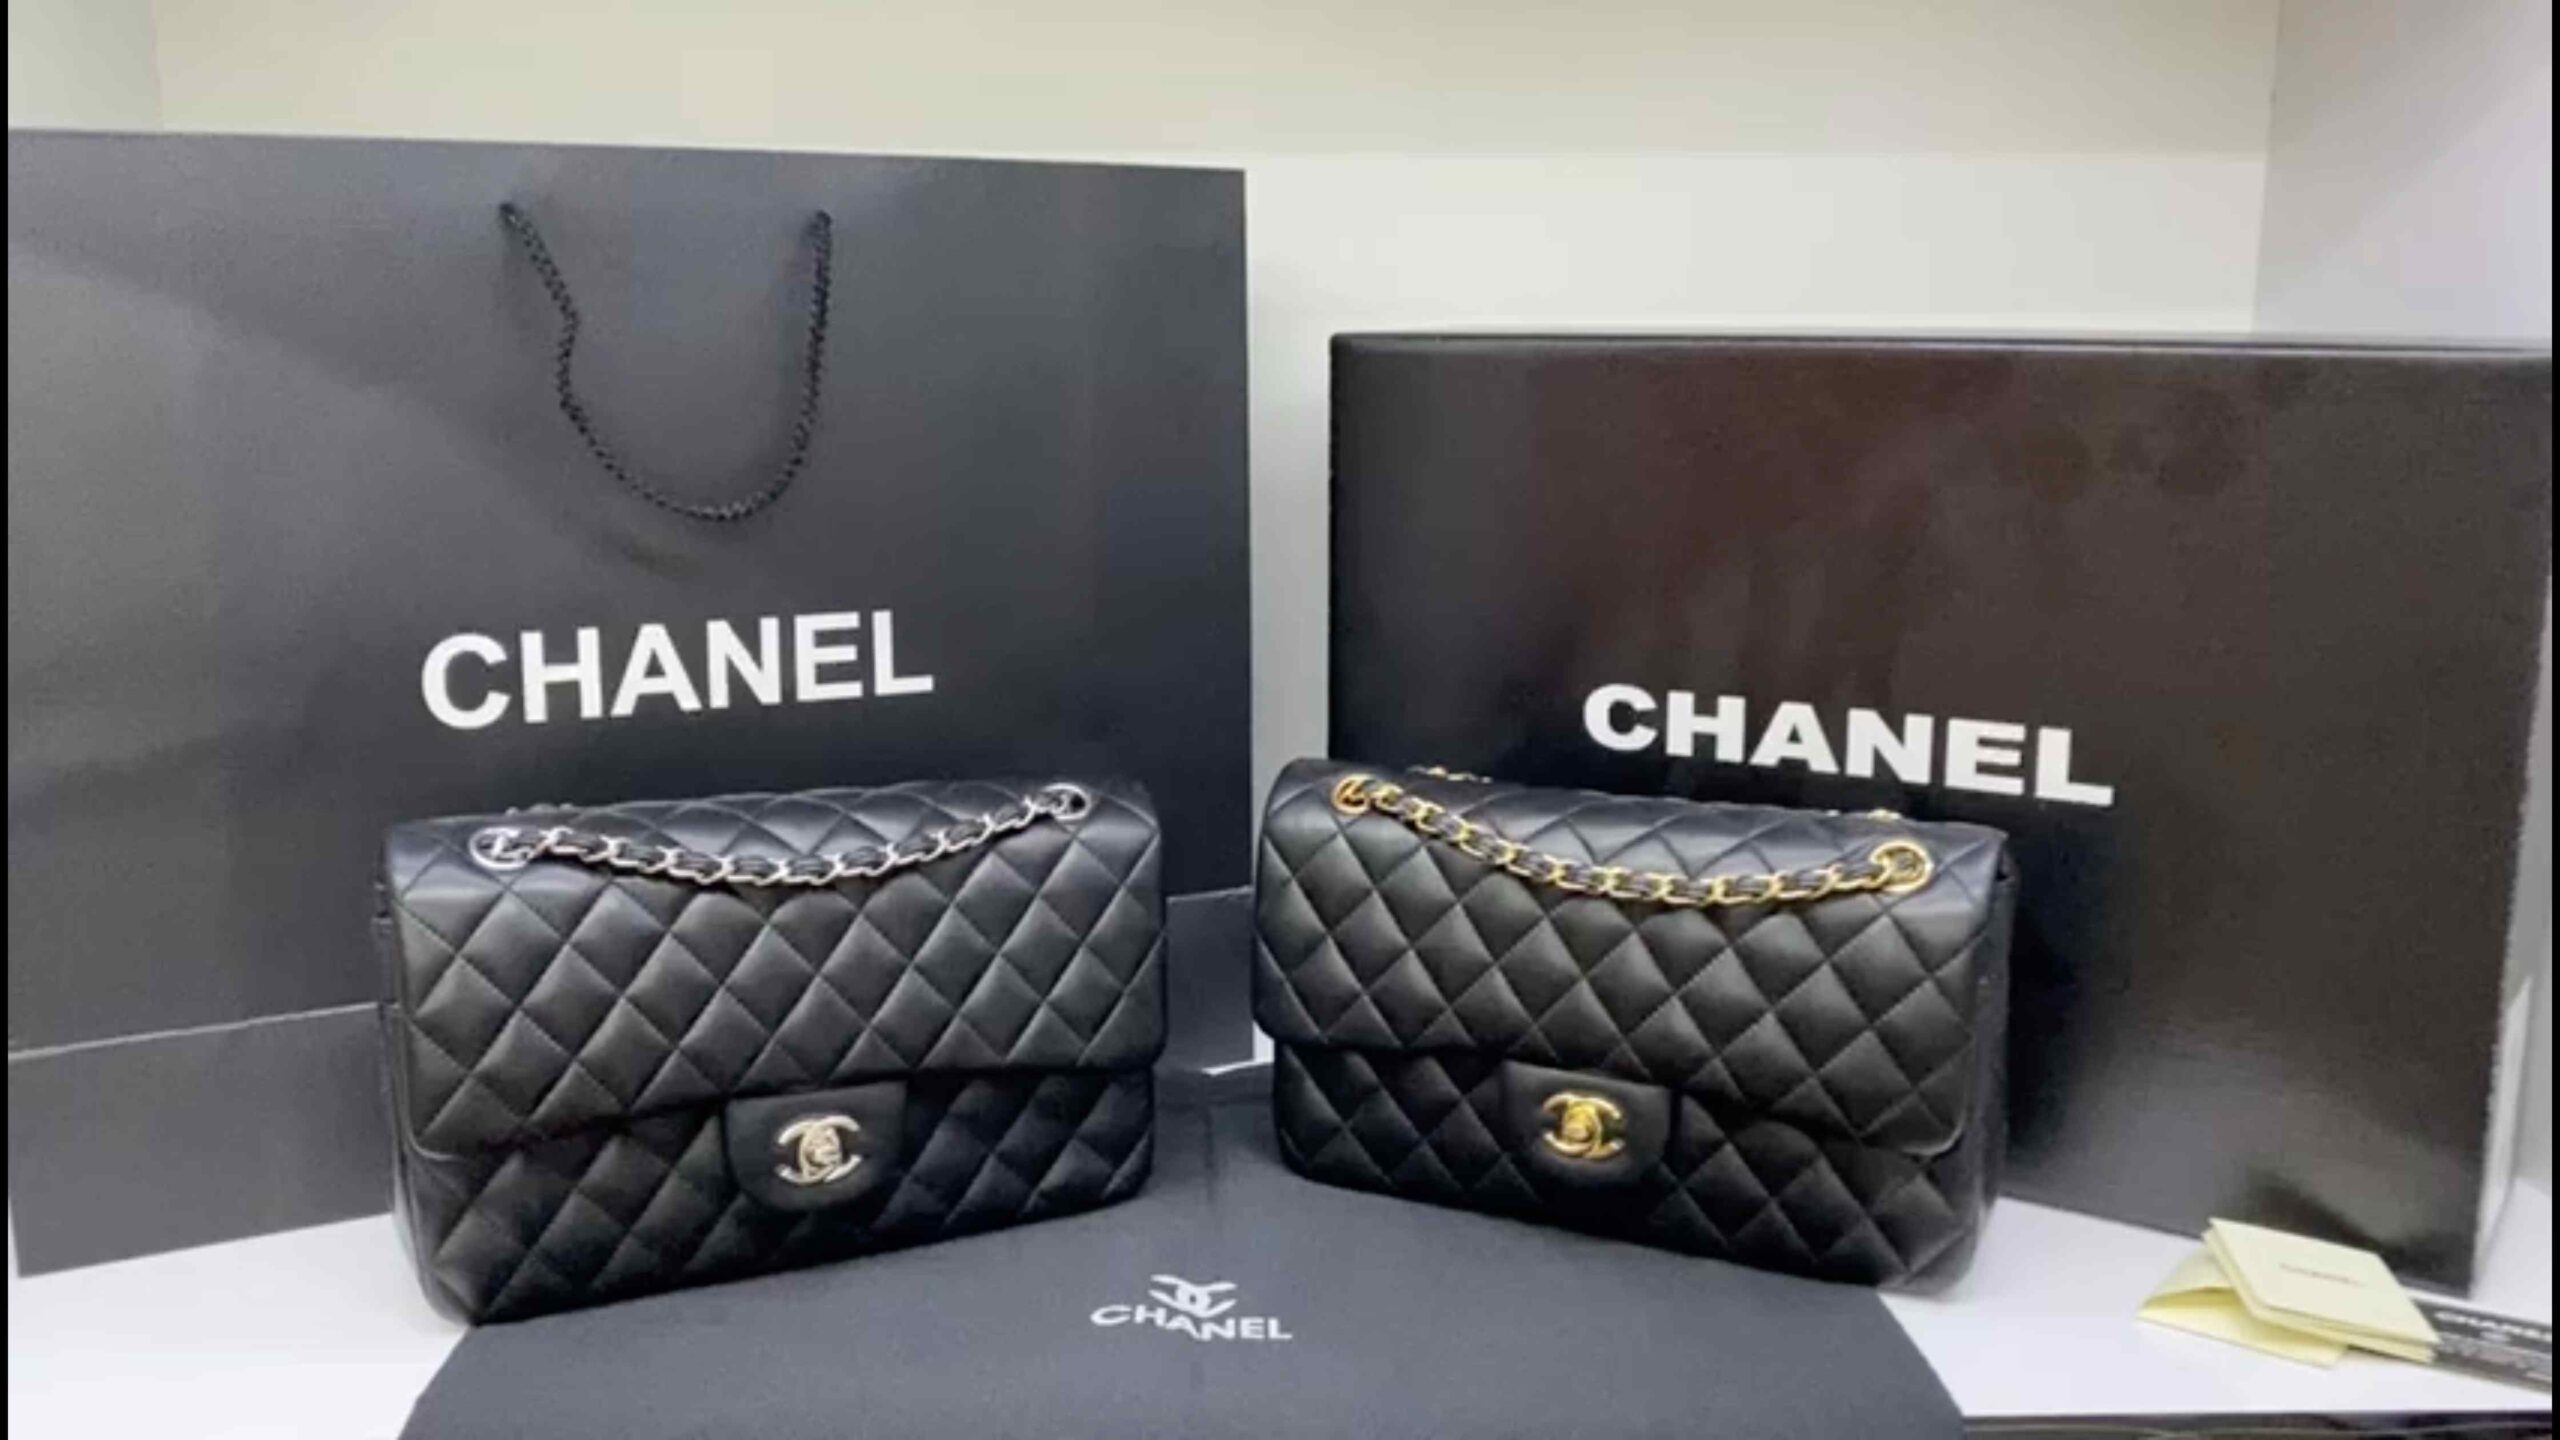 CHANEL 2-55 size